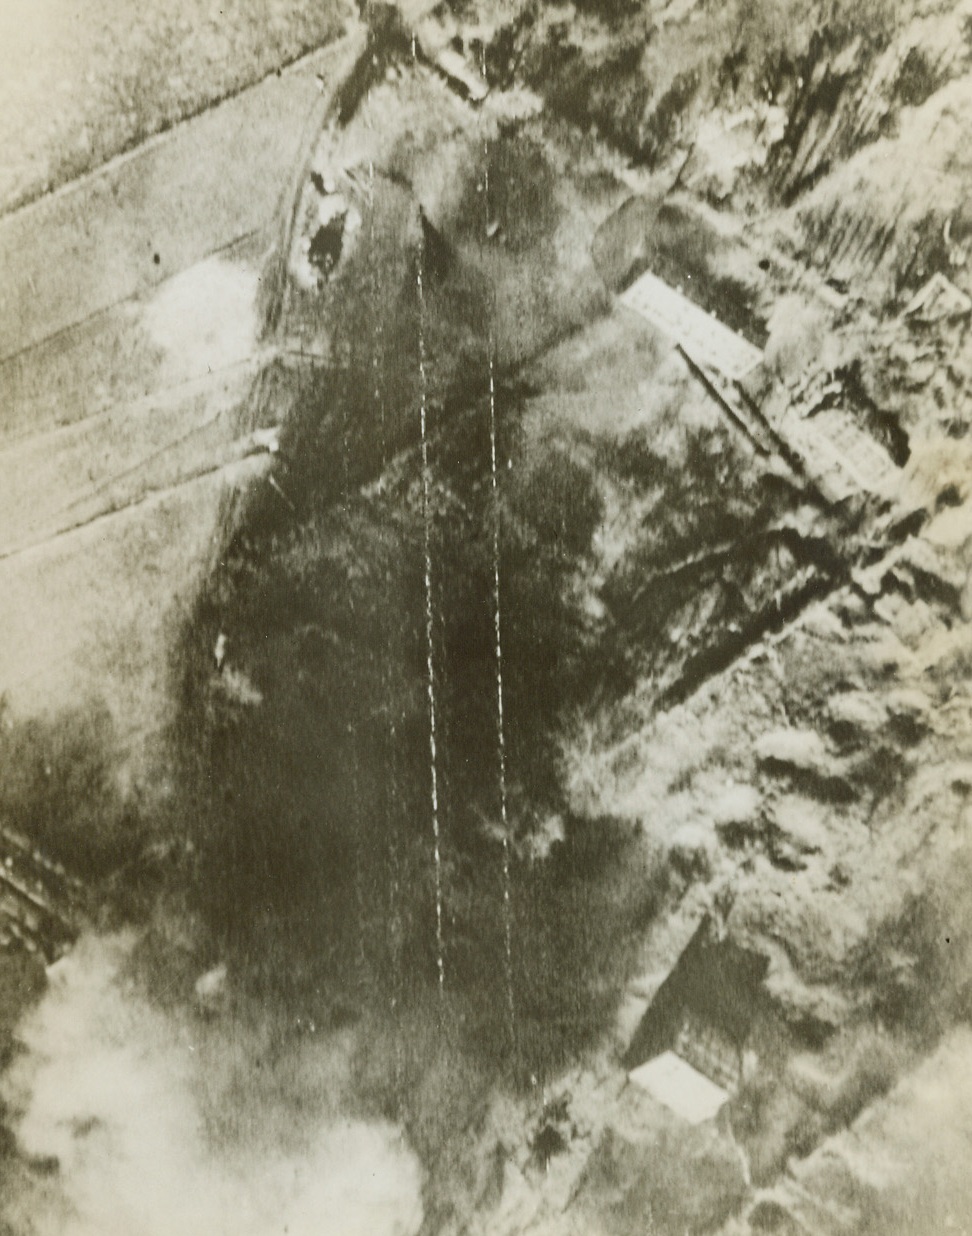 Hit ‘em Where It Hurts, 6/21/1944. Northern France -- Flying bomb installations in Northern France, the launching site with ramp (bottom center) and the auxiliary buildings, are blasted by an attack by the RAF. Credit: British Air Ministry photo from ACME;